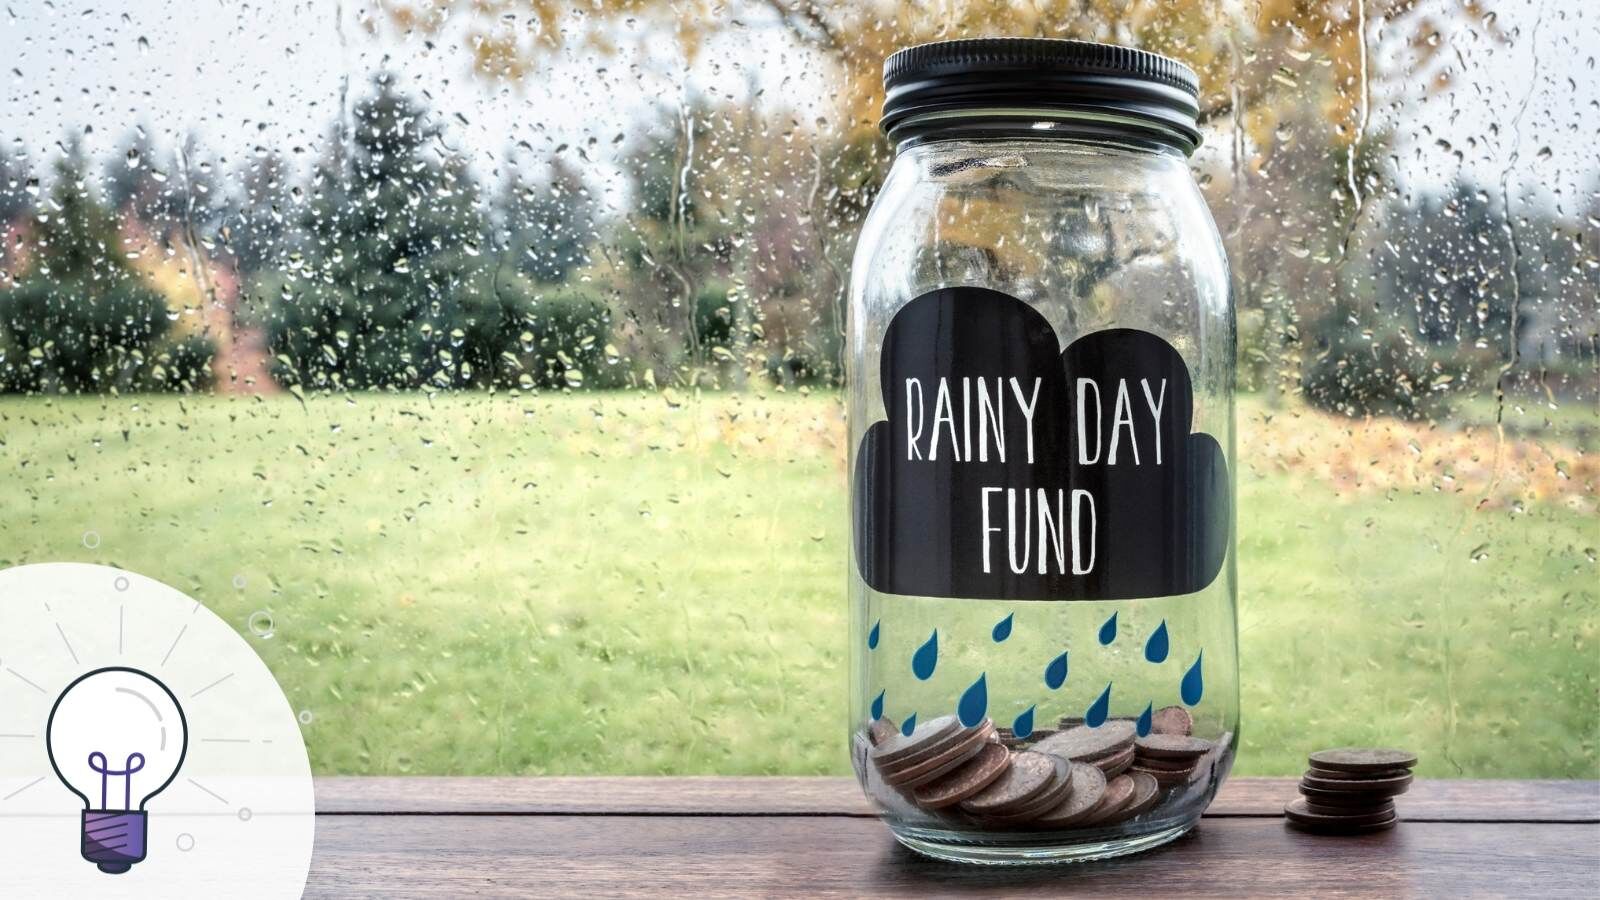 How To Create A Bankable Business Emergency Fund And Save Smartly For A Rainy Day